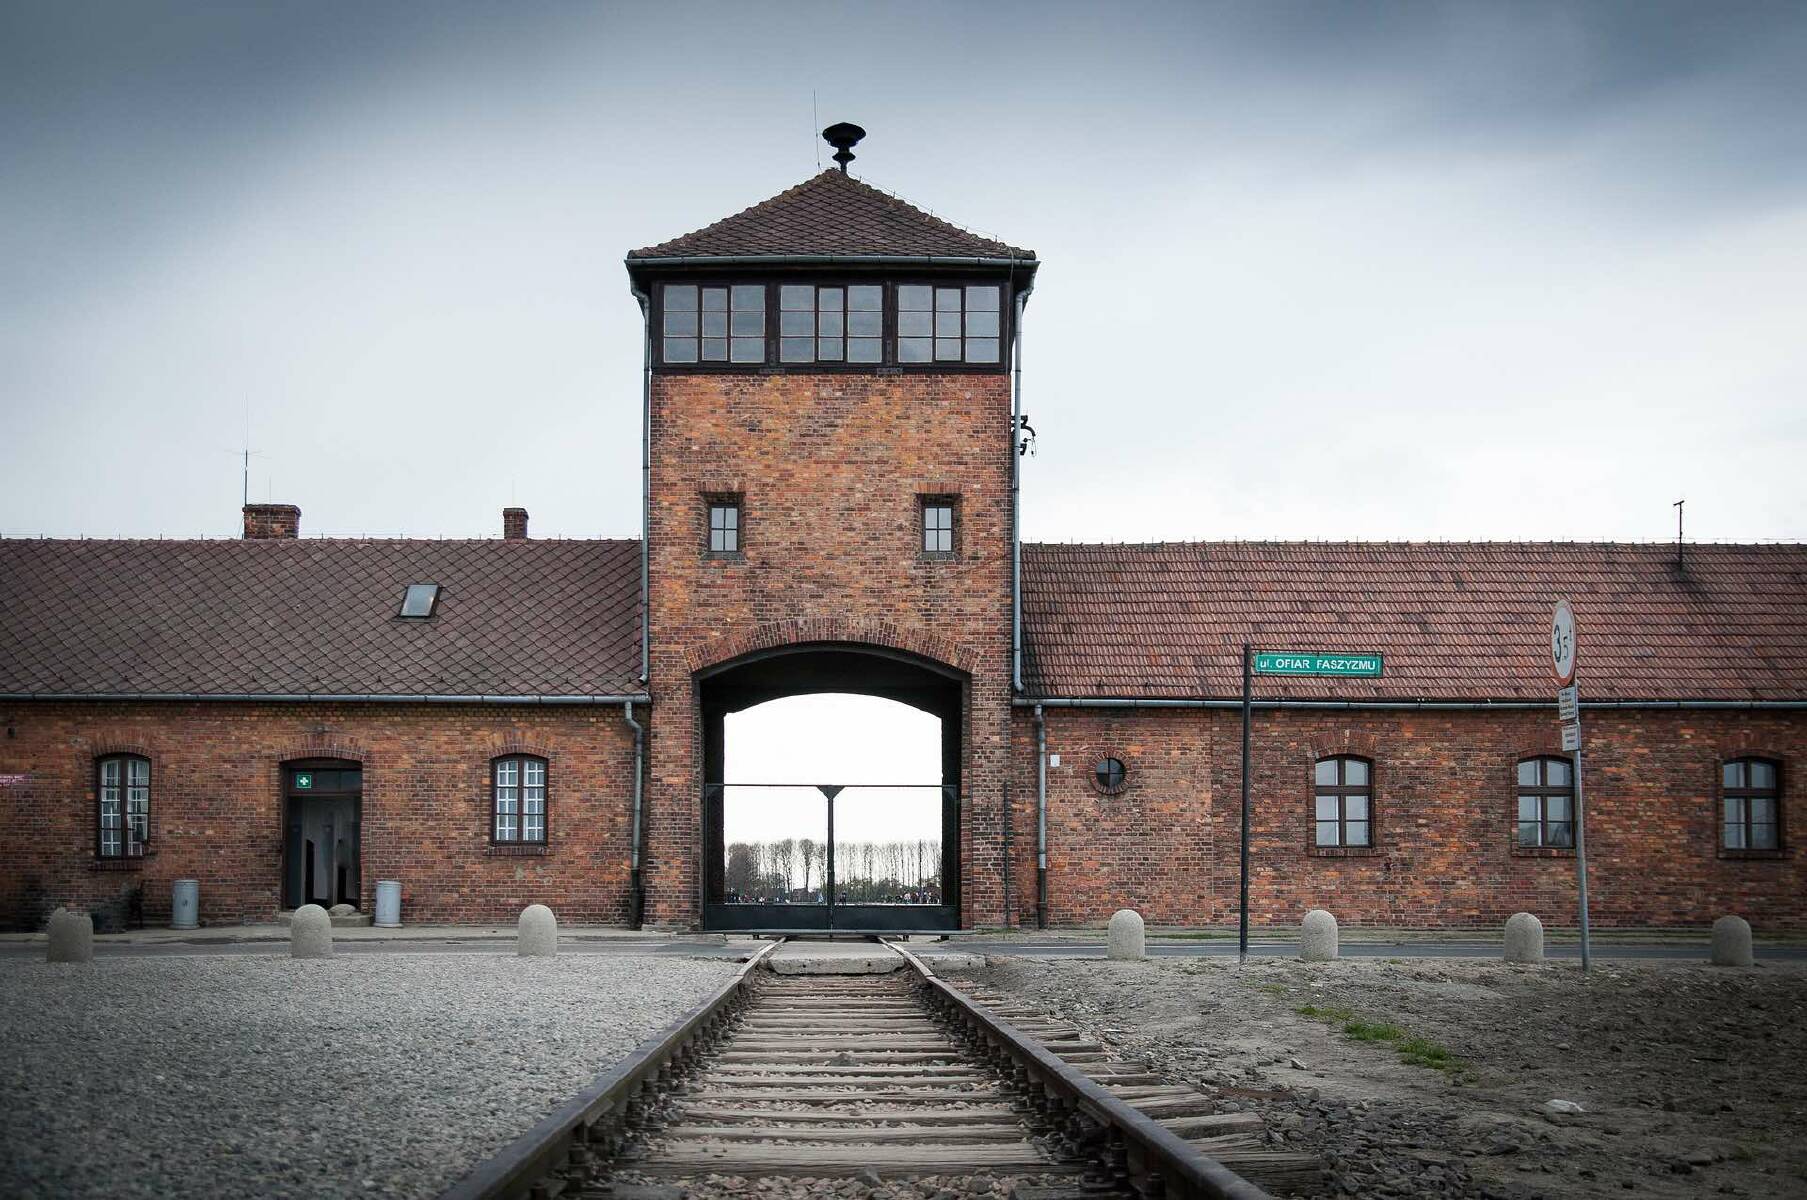 Auschwitz Birkenau Compare Prices For Tours From Different